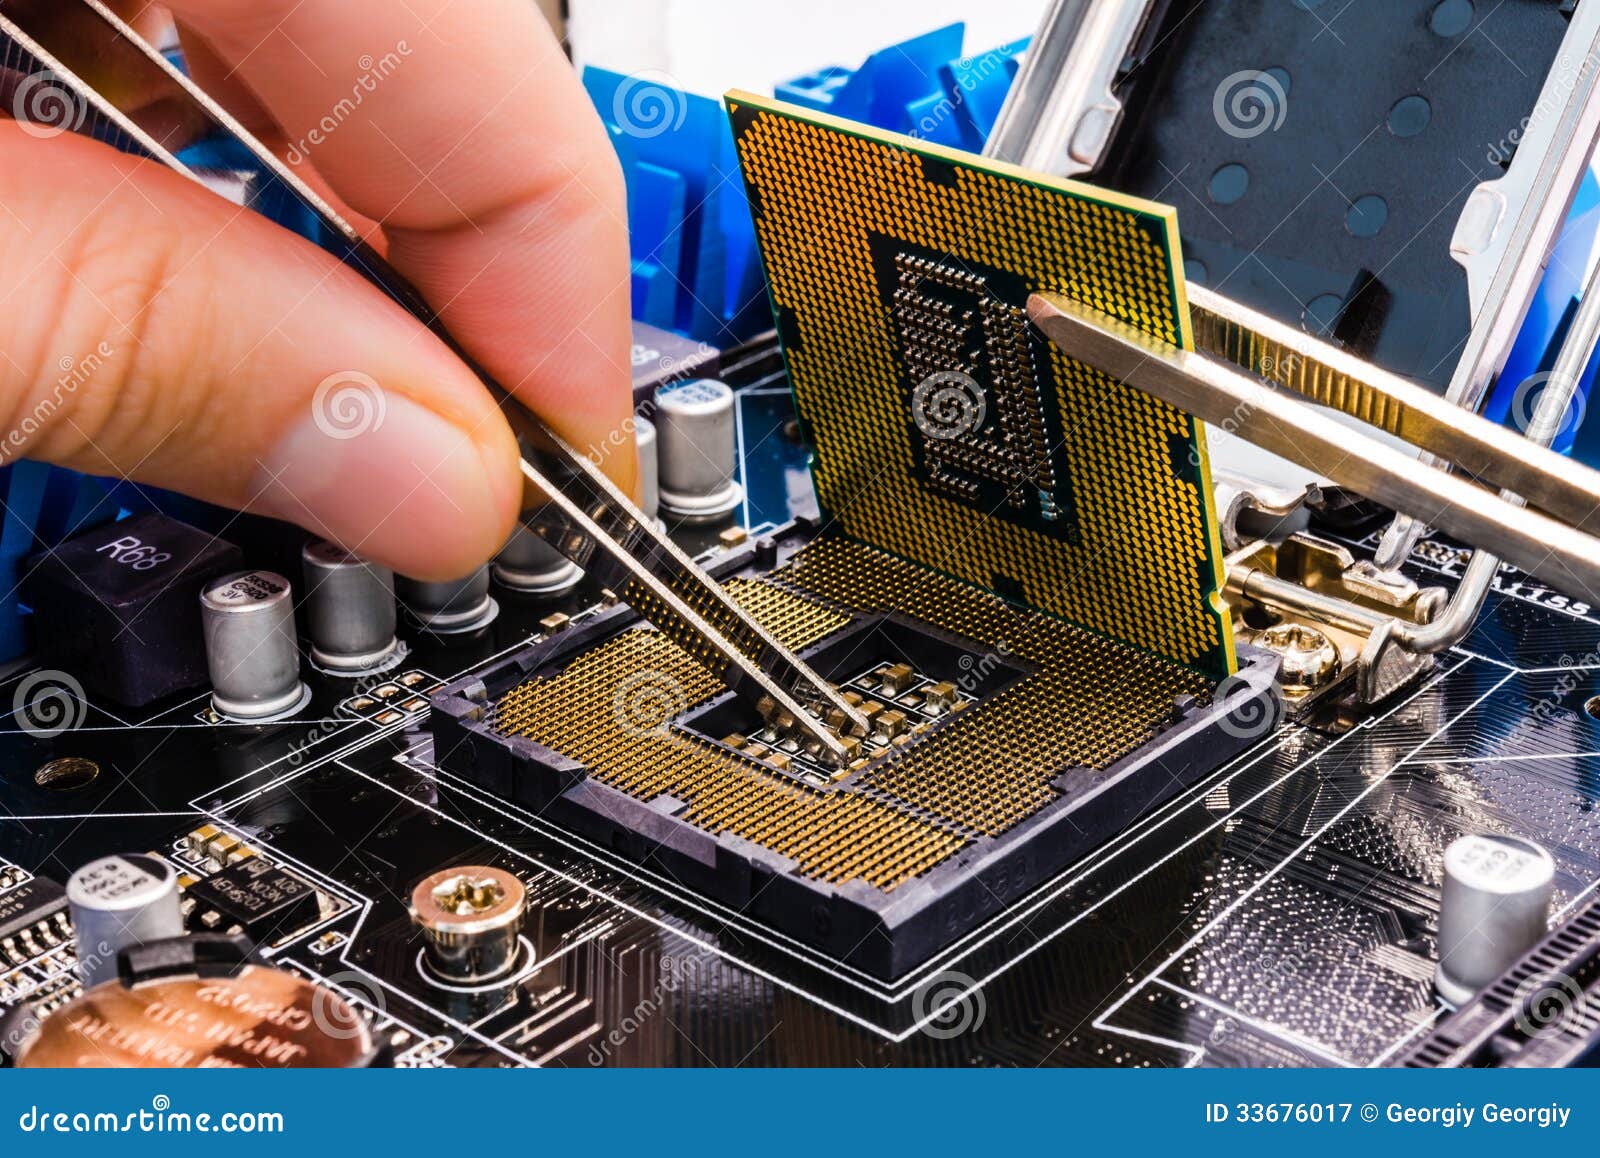 Computer Repair Stock Image Image Of Problems Component